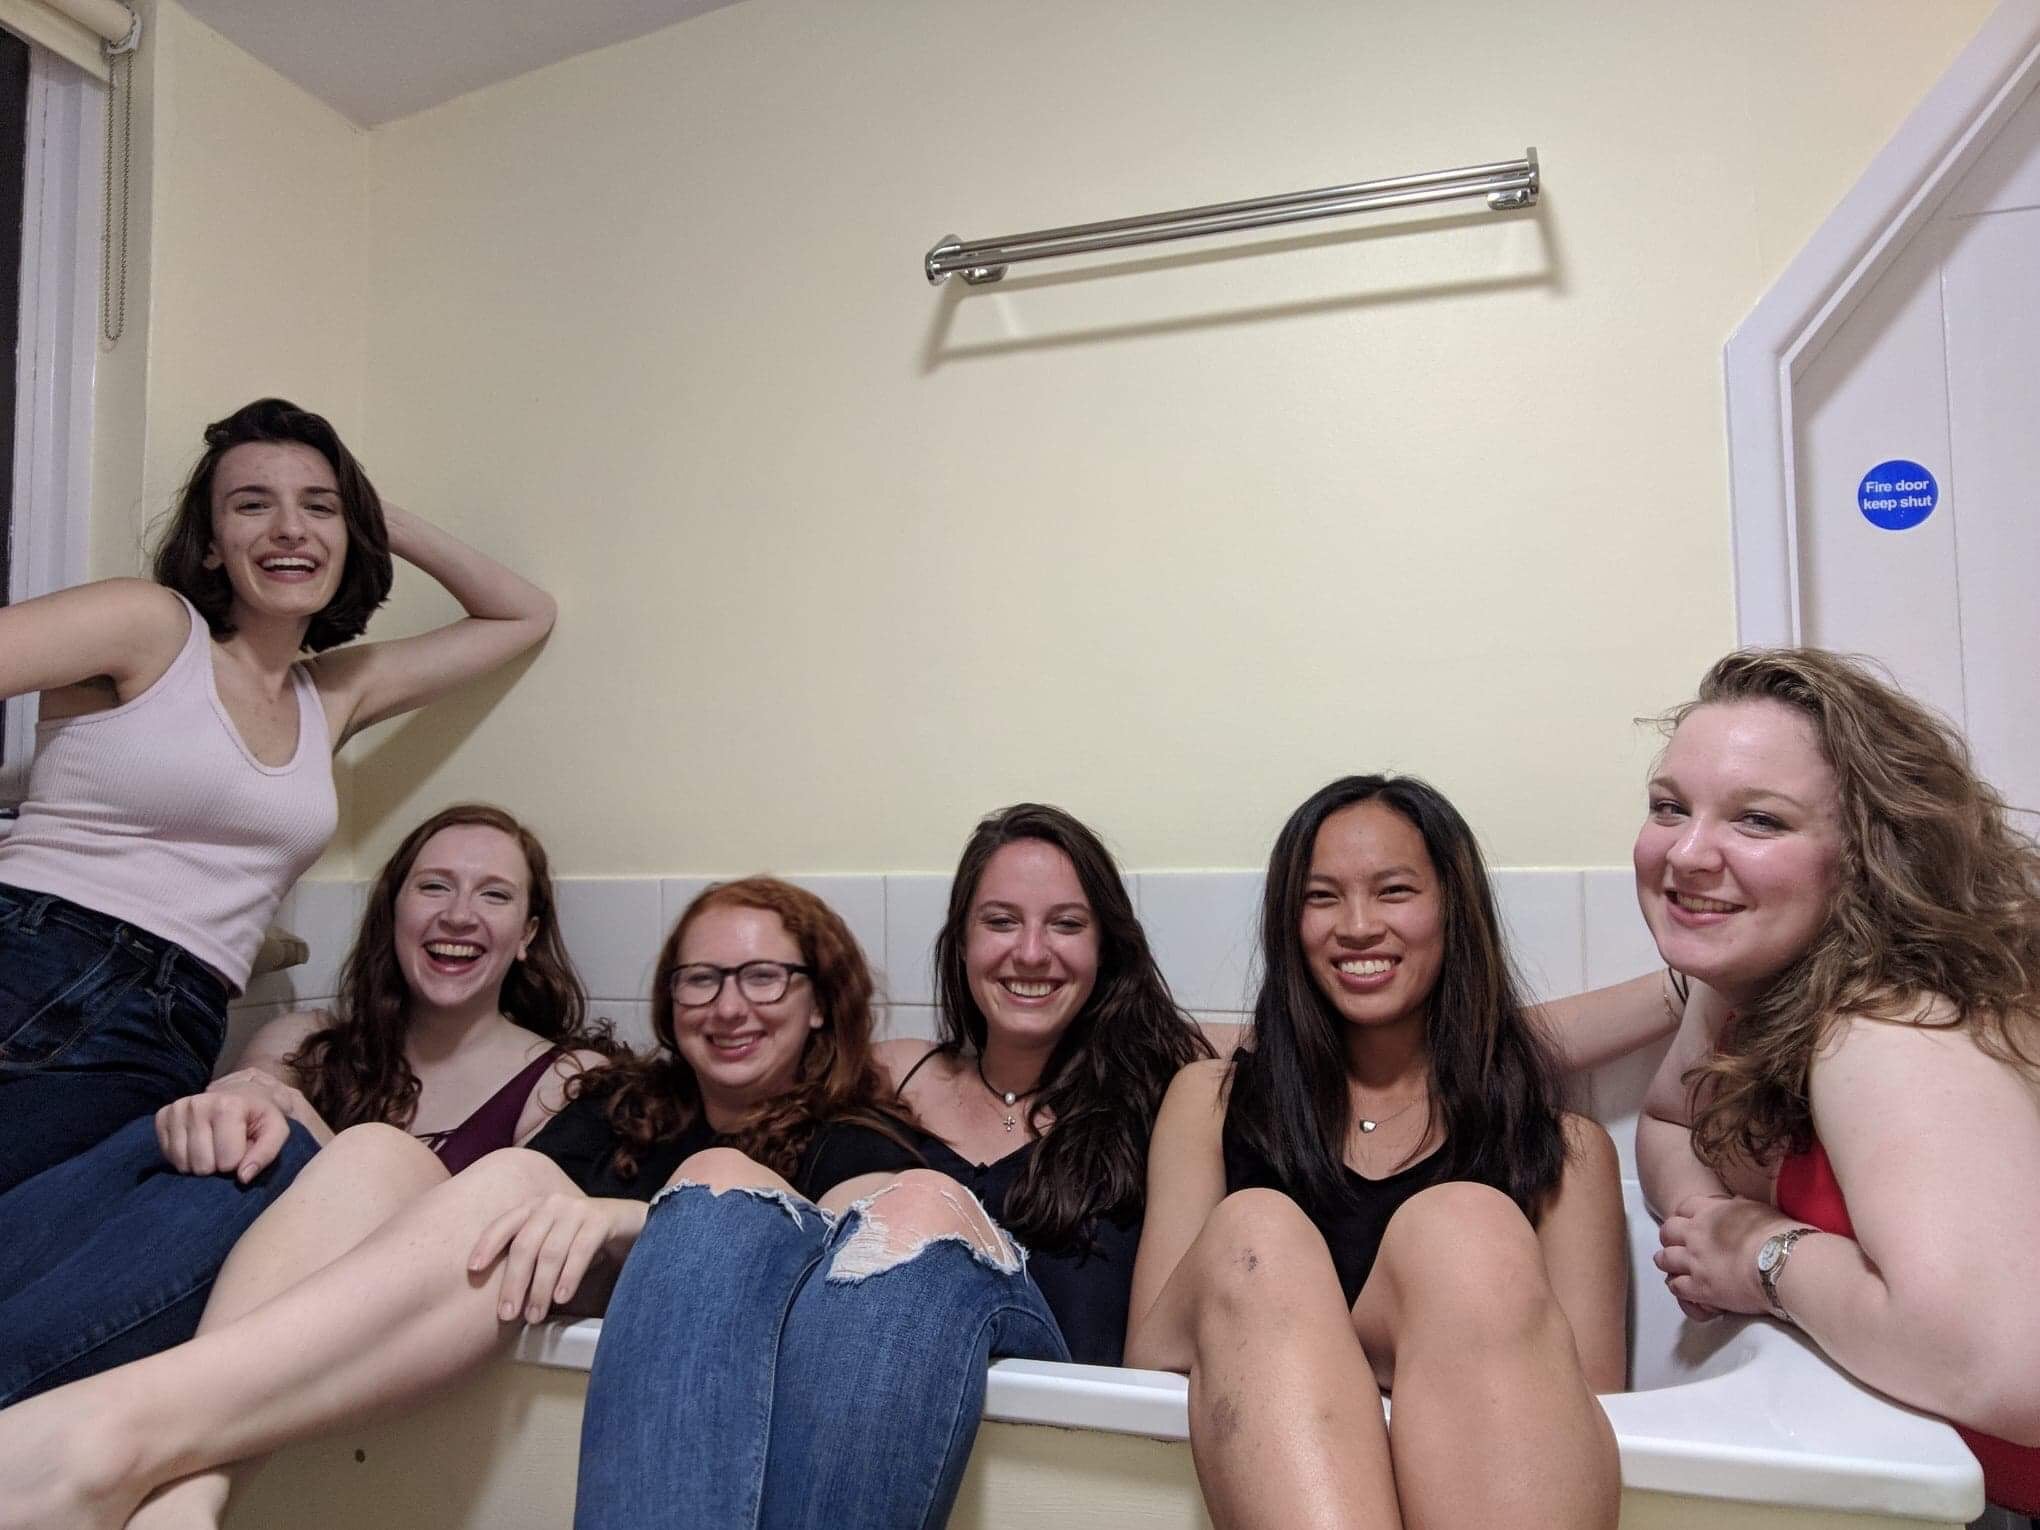  Six girls in a bathtub. (All clothed with no water!)